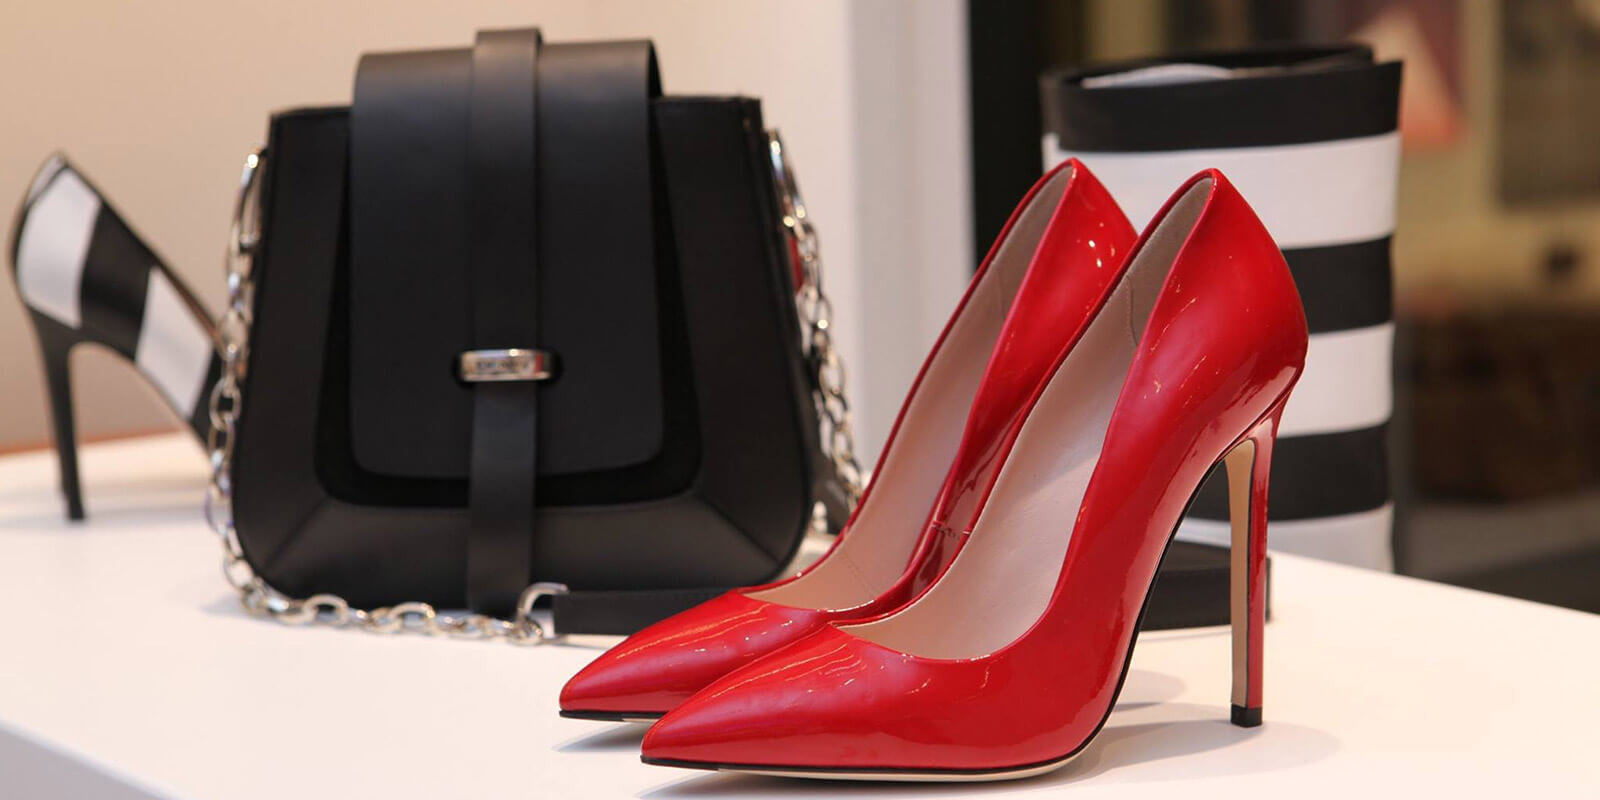 Red stiletto heel shoes on hot offer